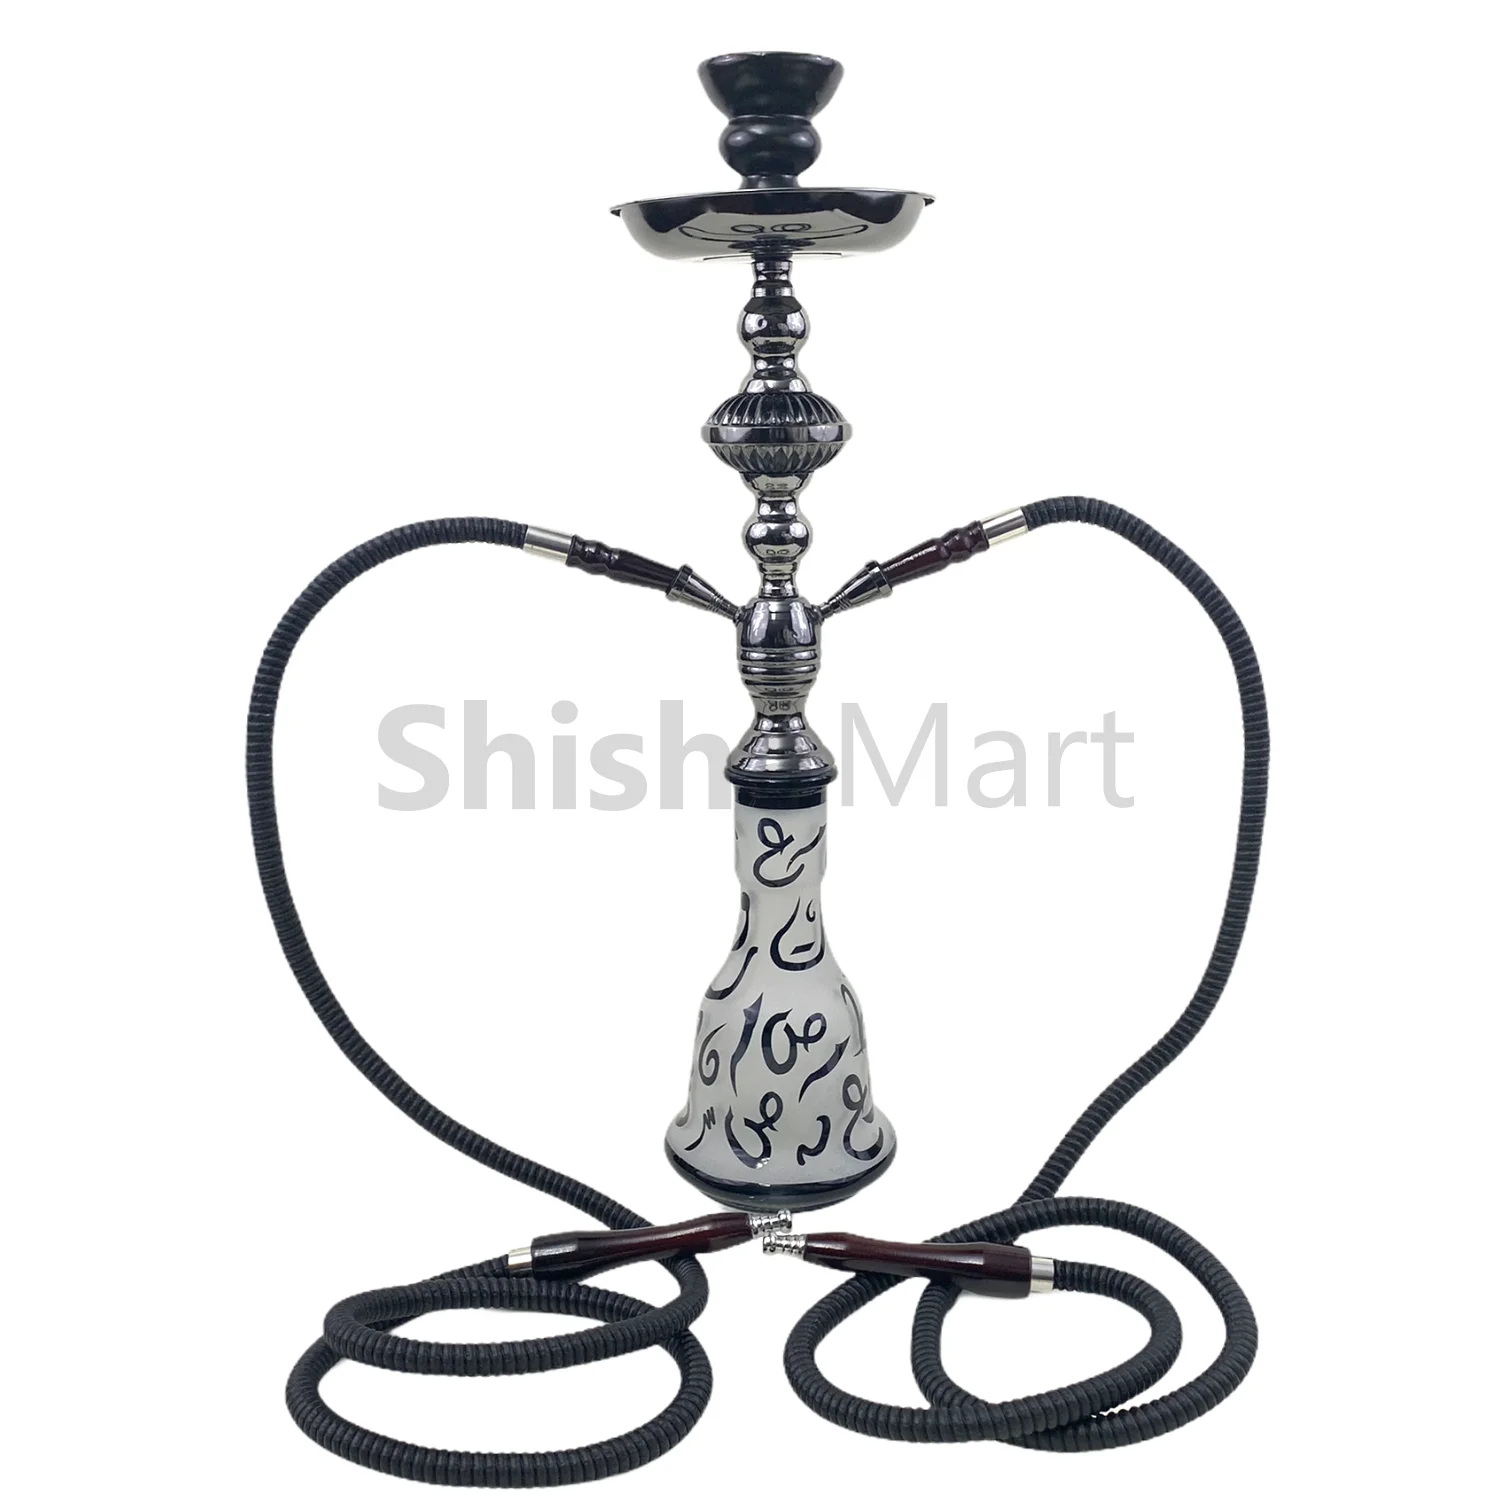 Zanobia Two Hose Hookah 276: Shop Best Prices